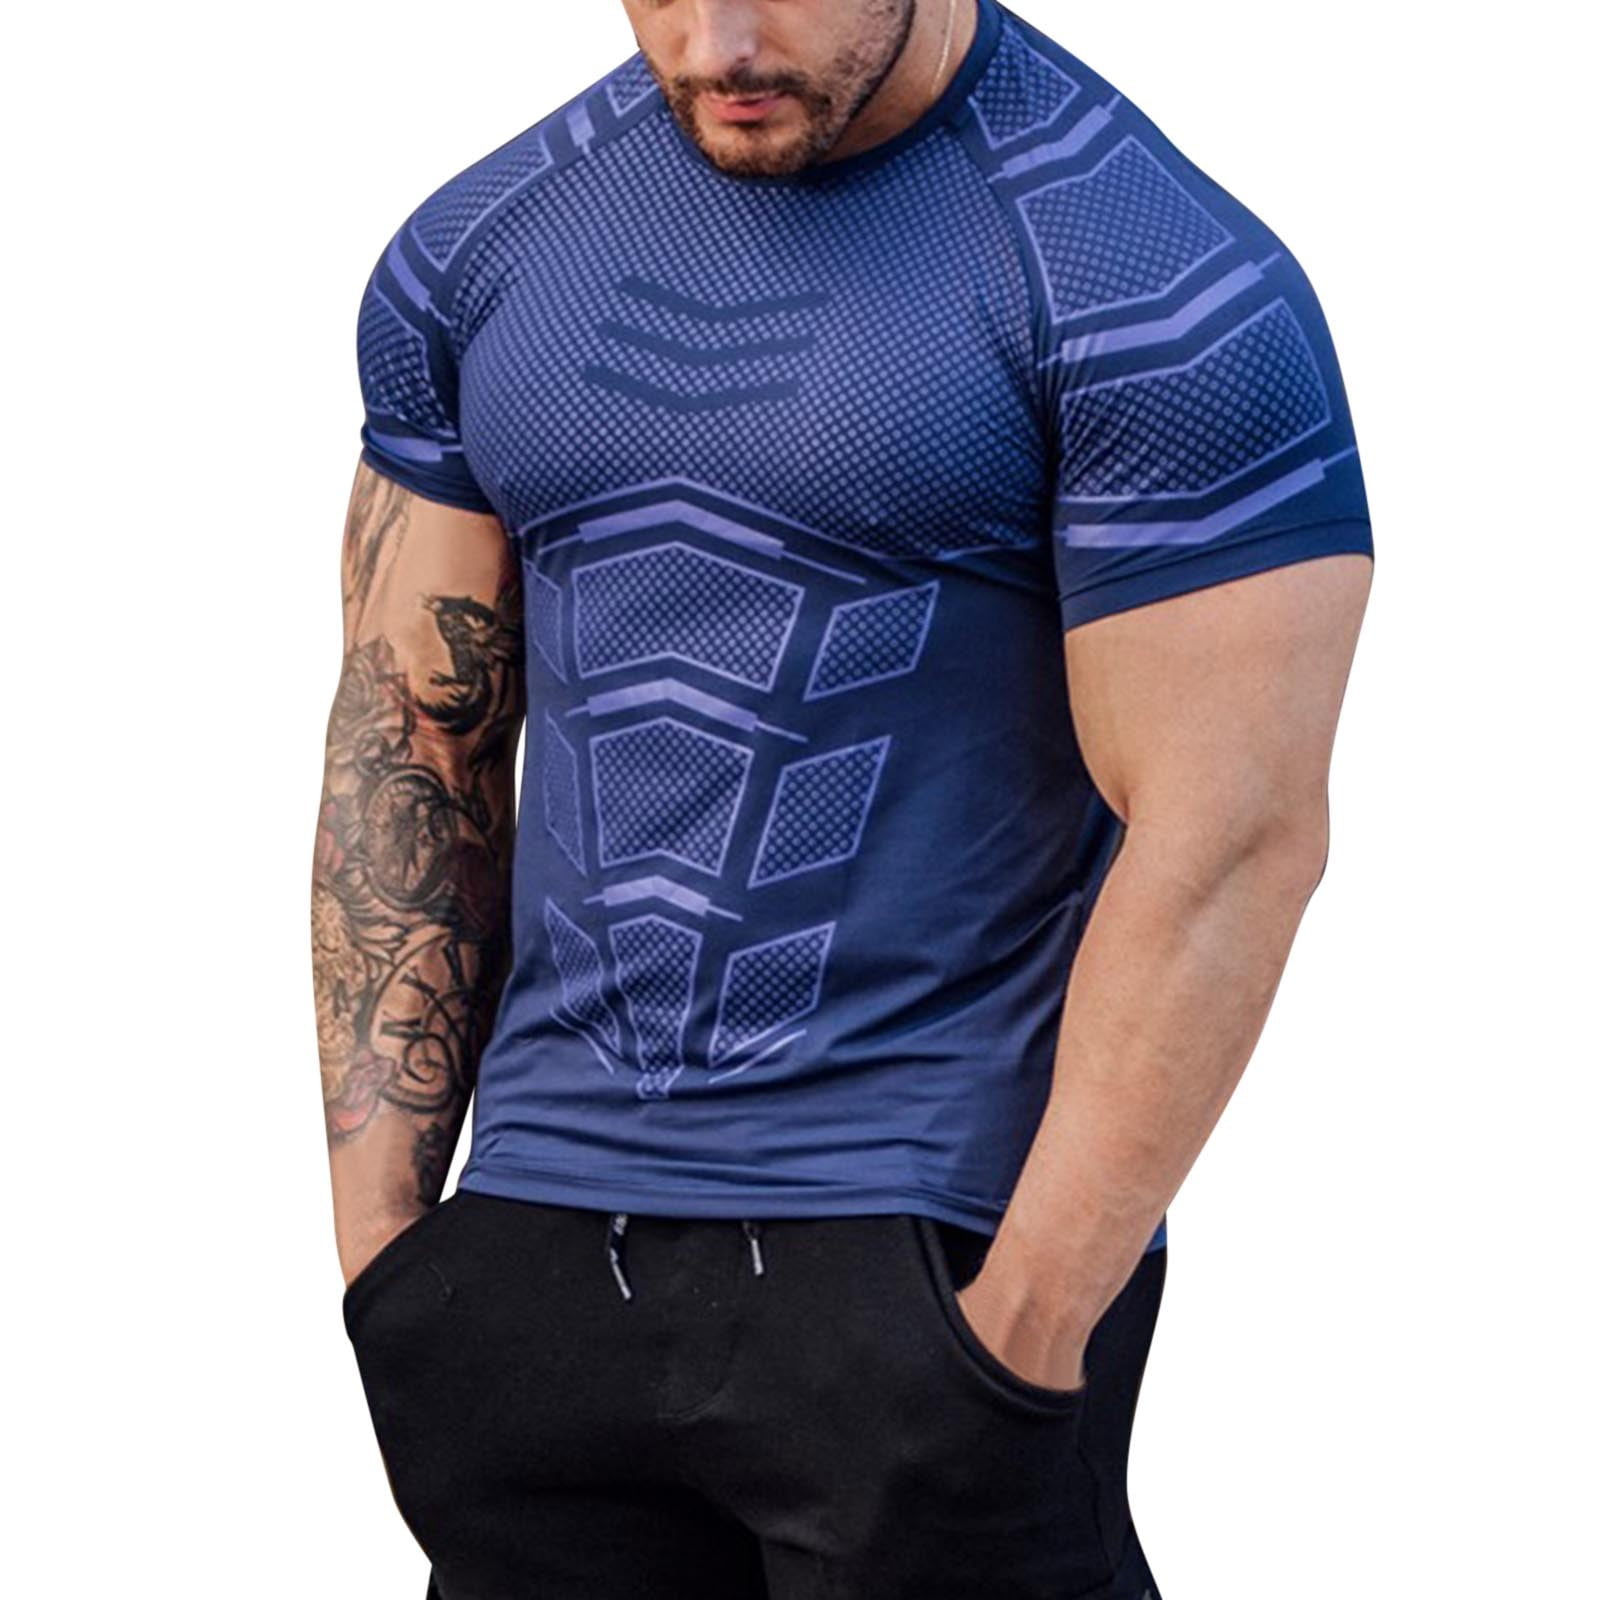 TAILONG Men's Compression Shirt Short Sleeve Sports Baselayer Tops Slimming  Body Shaper for Athletic Workout T-Shirts, Black, XL price in UAE,   UAE